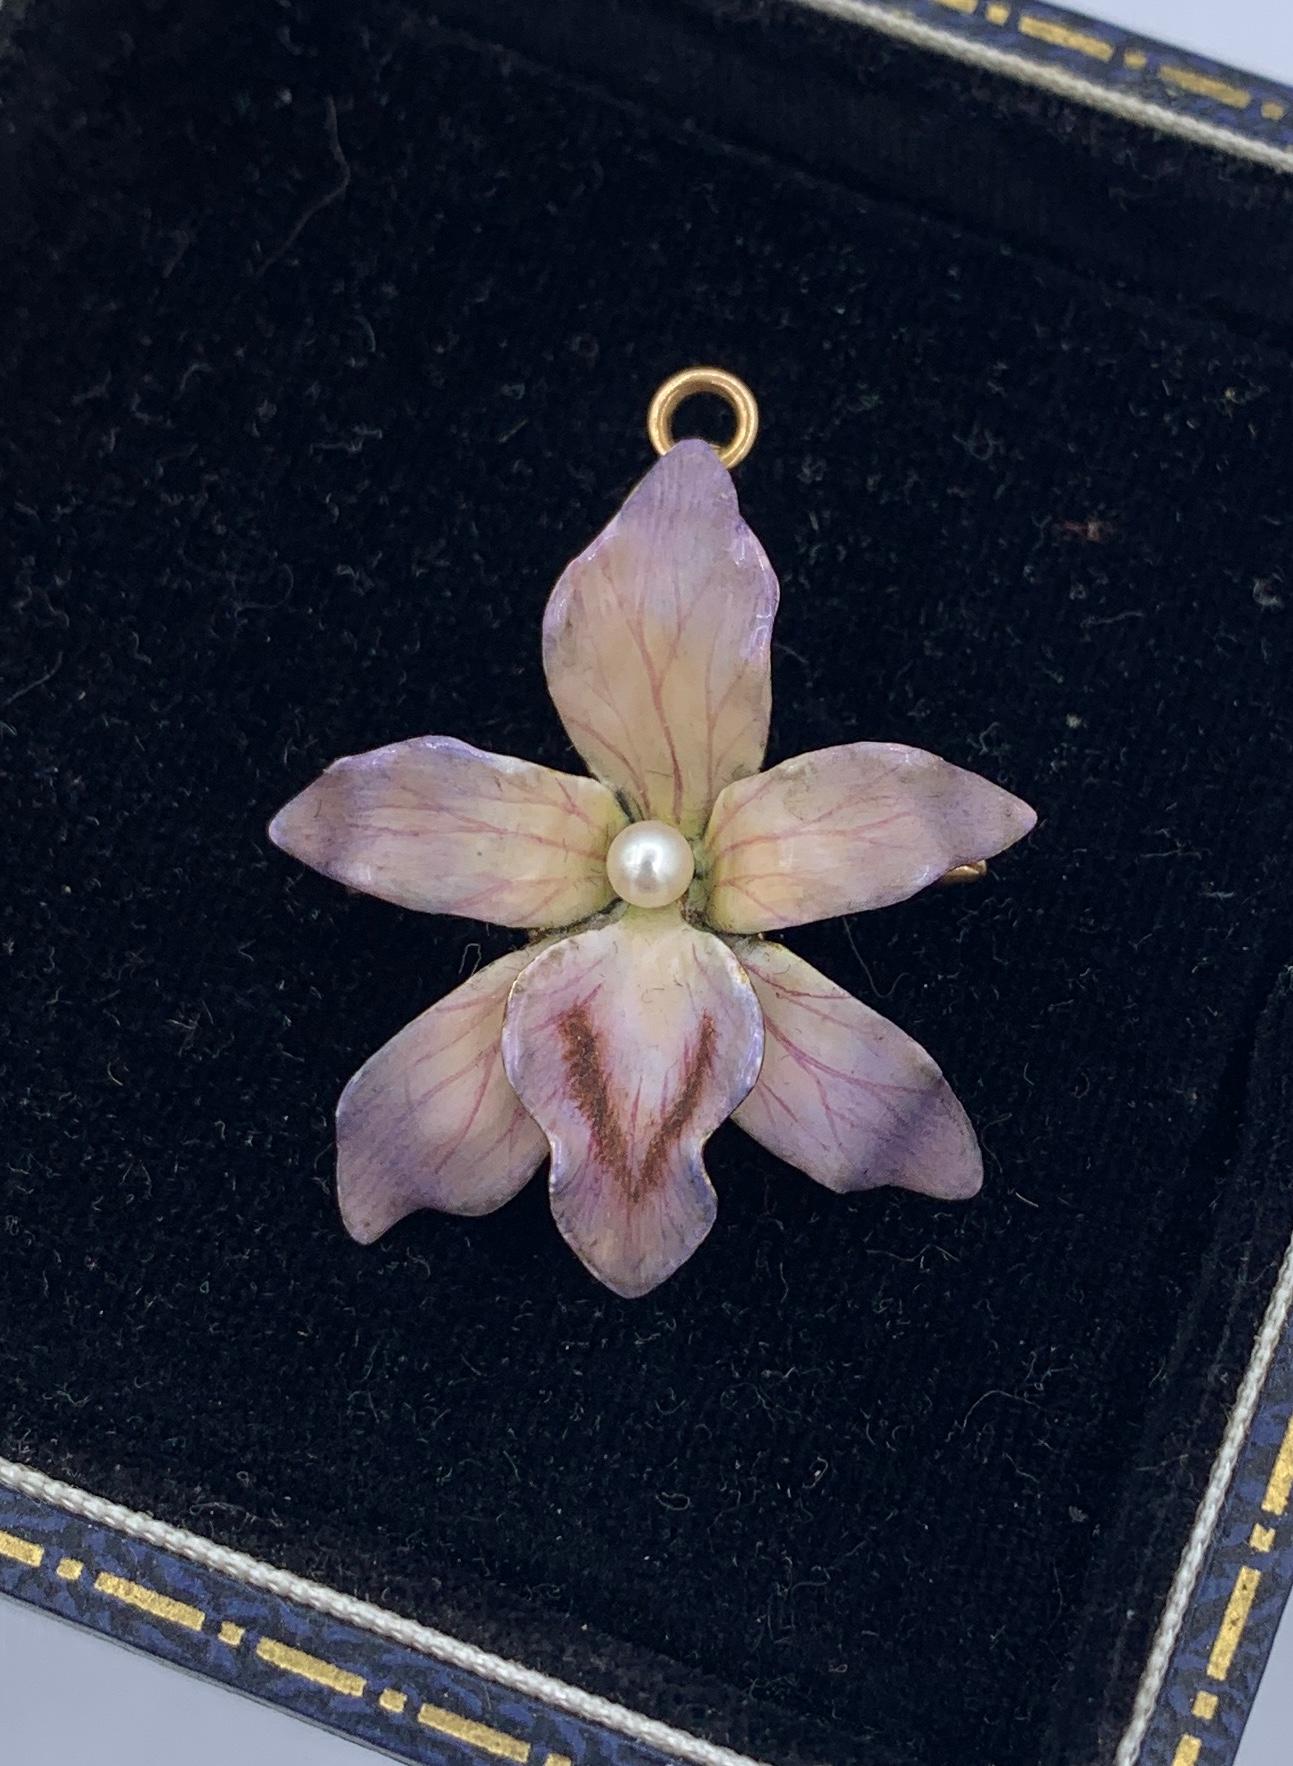 THIS IS AN ANTIQUE VICTORIAN - ART NOUVEAU LAVALIERE PENDANT OR BROOCH IN THE FORM OF AN ORCHID FLOWER.  THE ORCHID IS ABSOLUTELY STUNNING WITH THE MOST SPECTACULAR MULTI-HUED LAVENDER, PURPLE, AND PINK DETAILED ENAMEL OF THE HIGHEST QUALITY SET